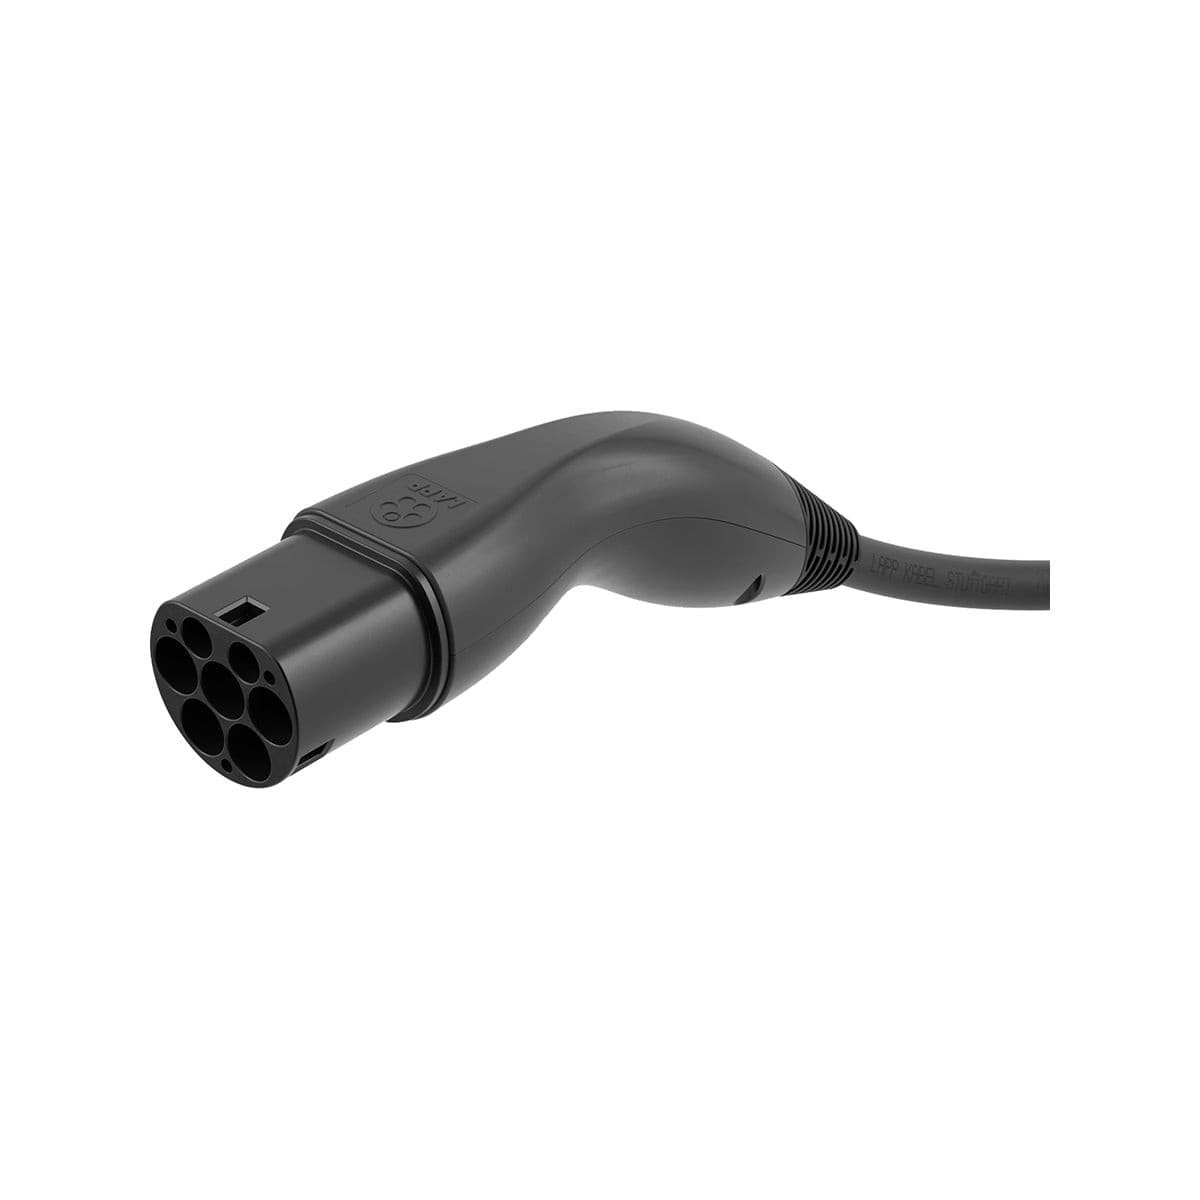 LAPP EV Helix Charge Cable Type 2 (22kW-3P-32A) 5m for Hybrid and Electric Cars - Black.